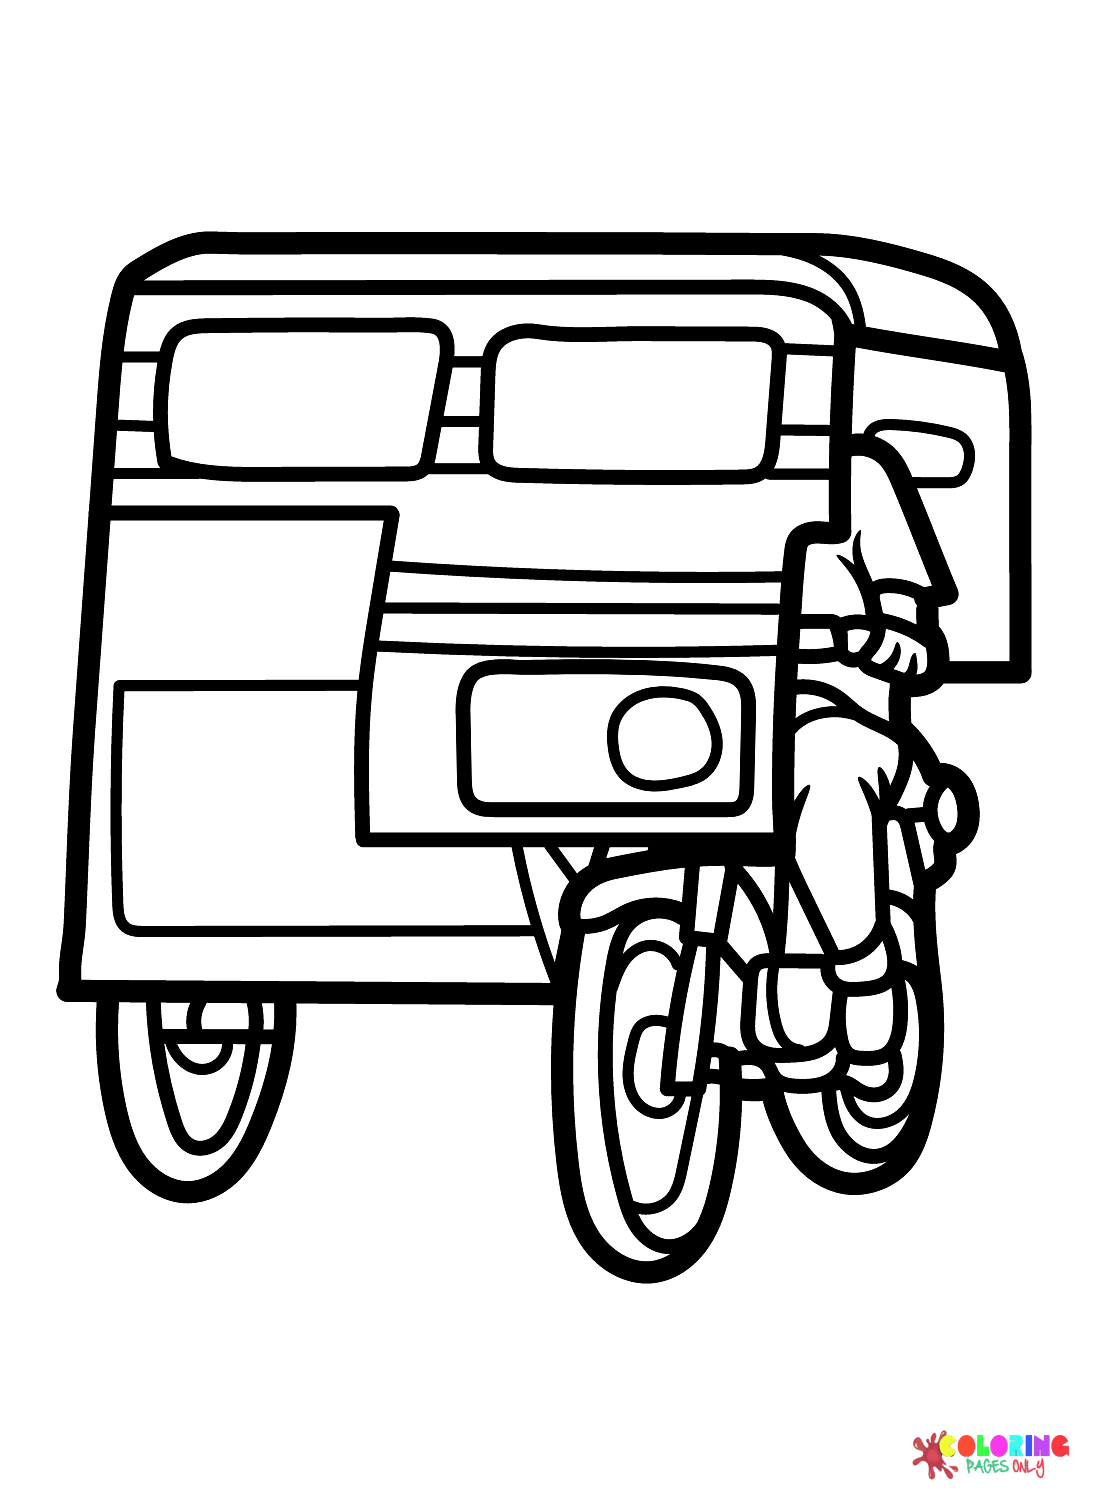 Tricycle coloring pages printable for free download